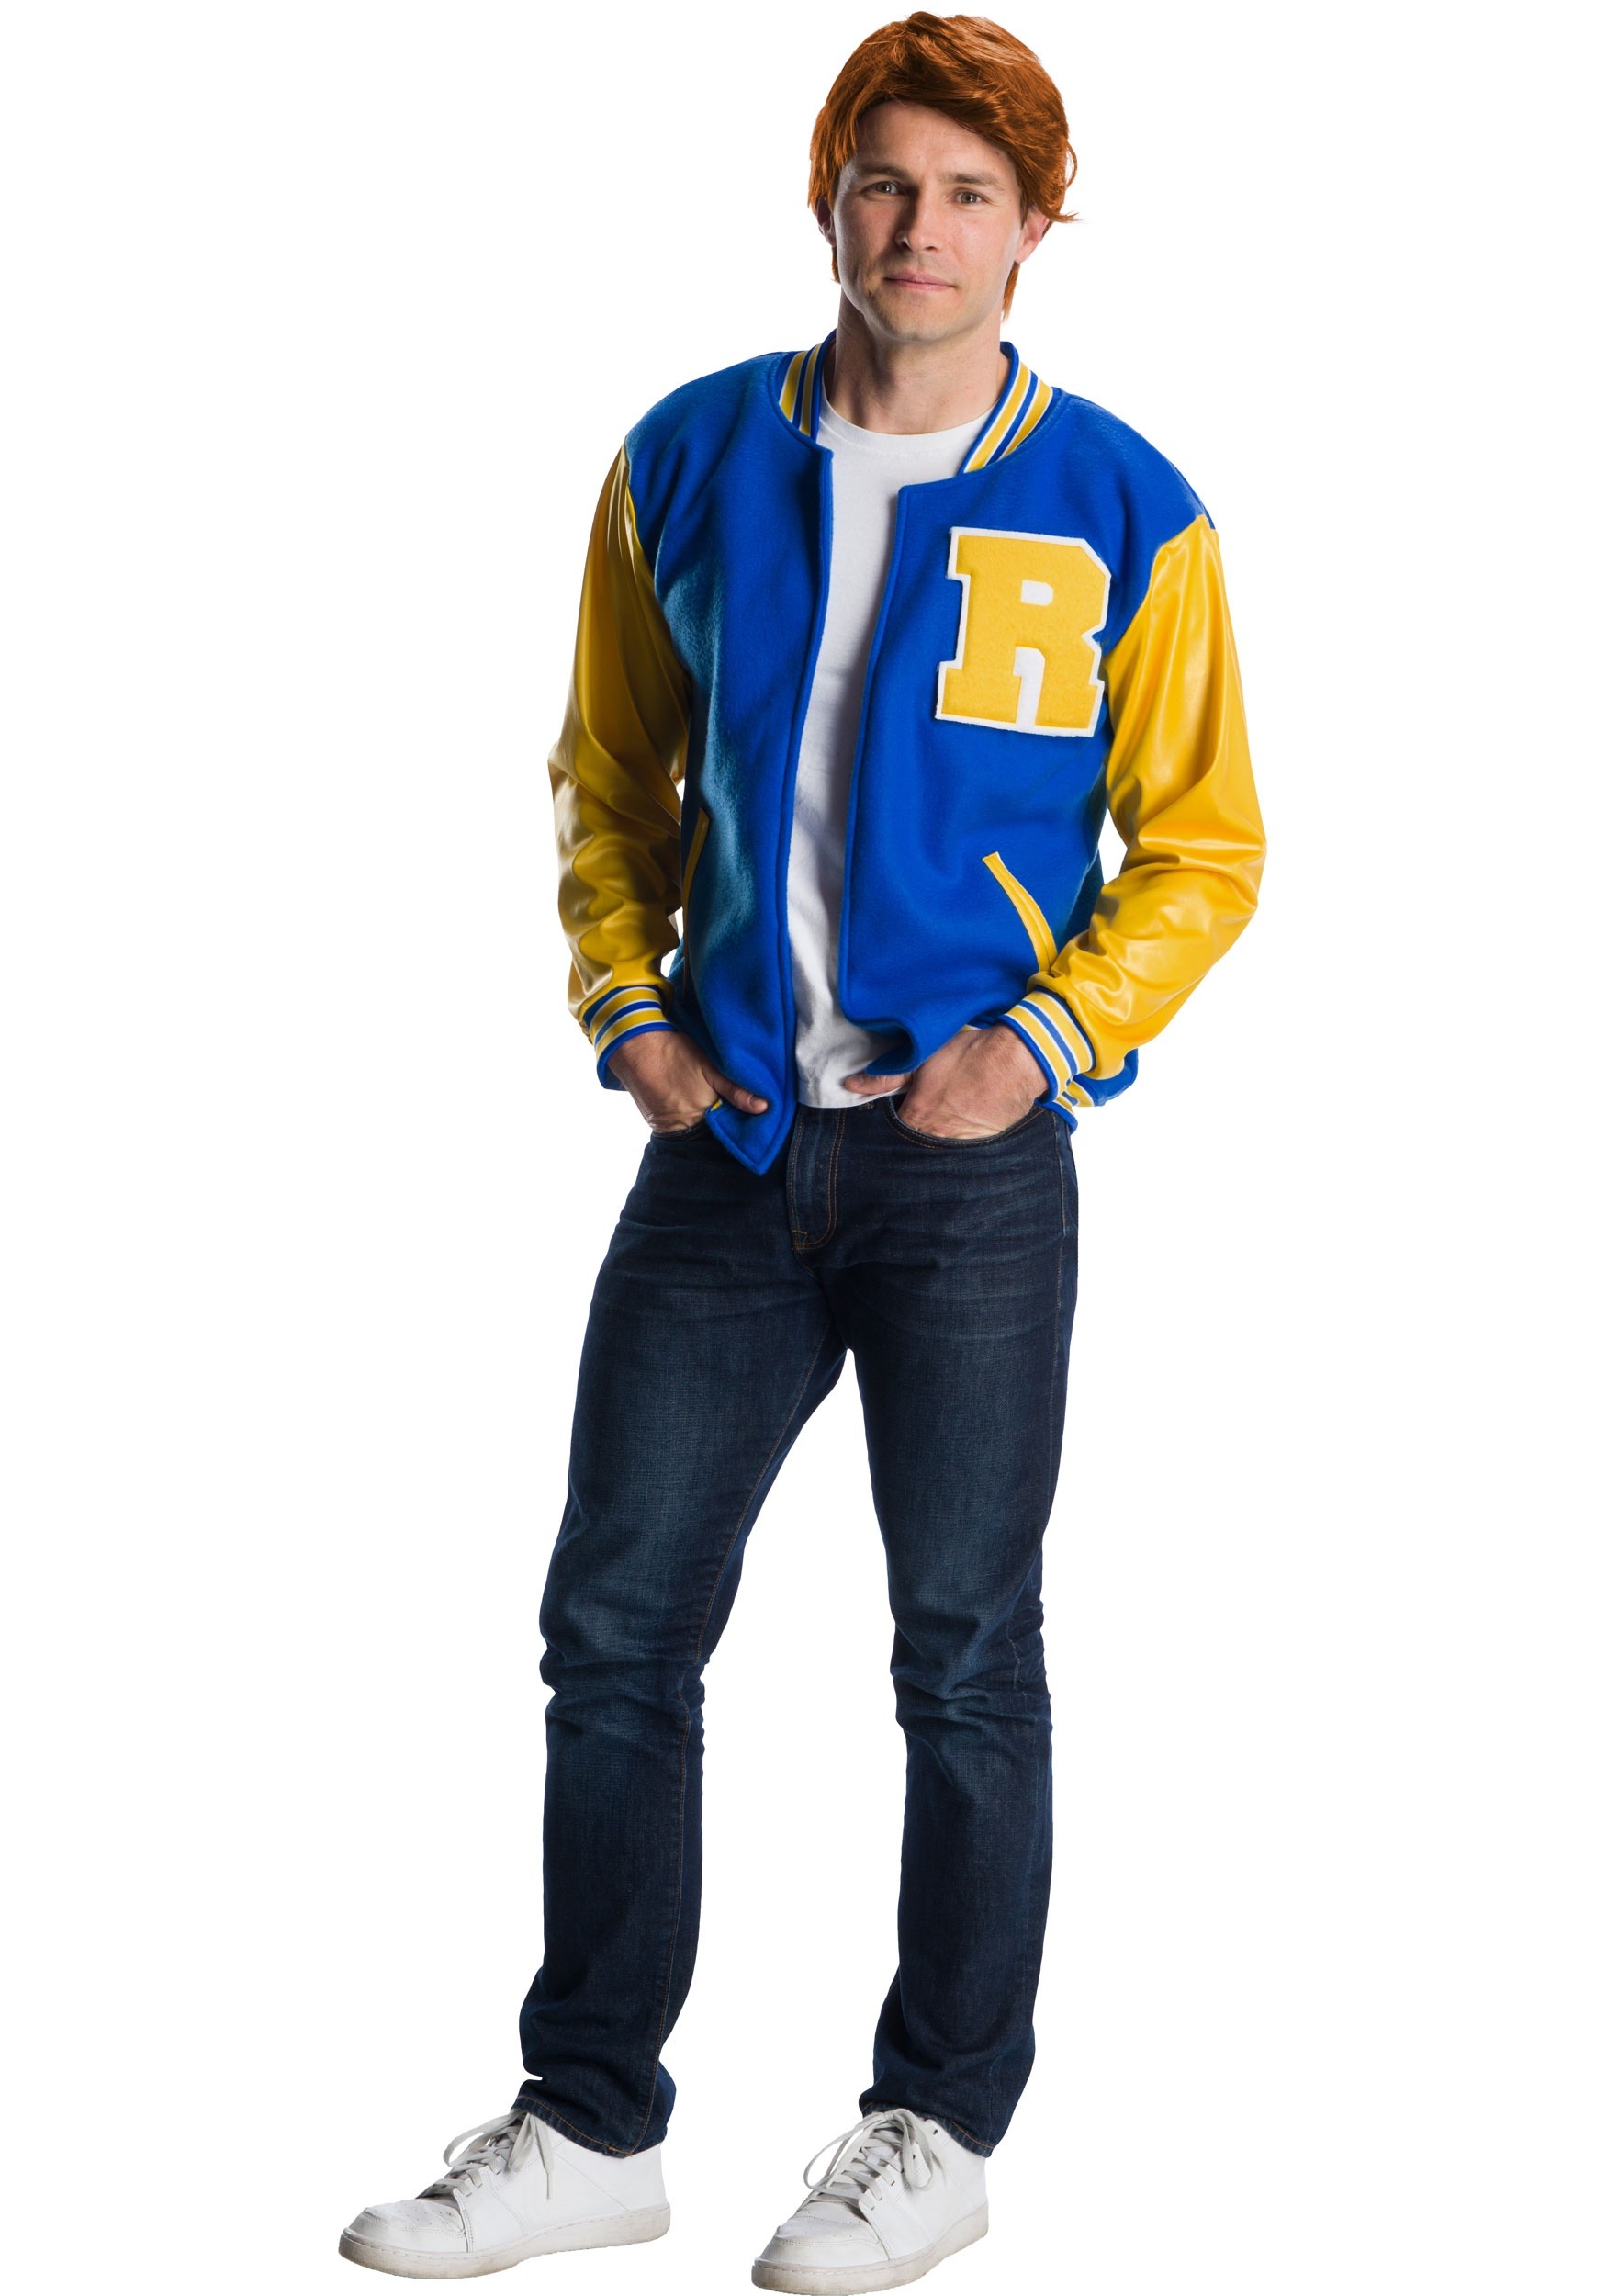 Image of Riverdale Archie Andrews Adult Costume ID RU700027-XL